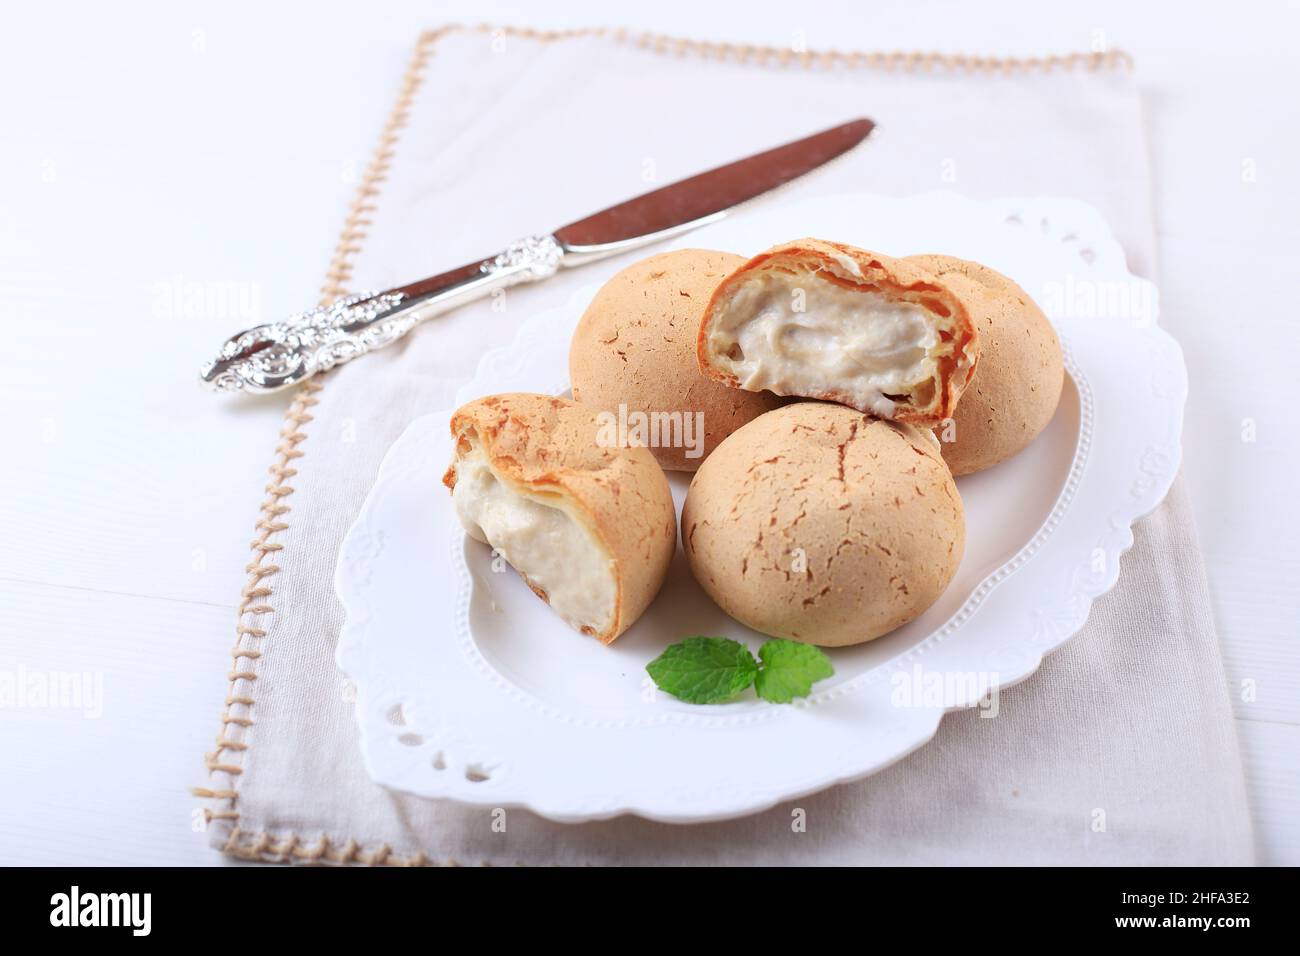 Japanese Mochi Bread with Cream Inside, on White Plate Stock Photo